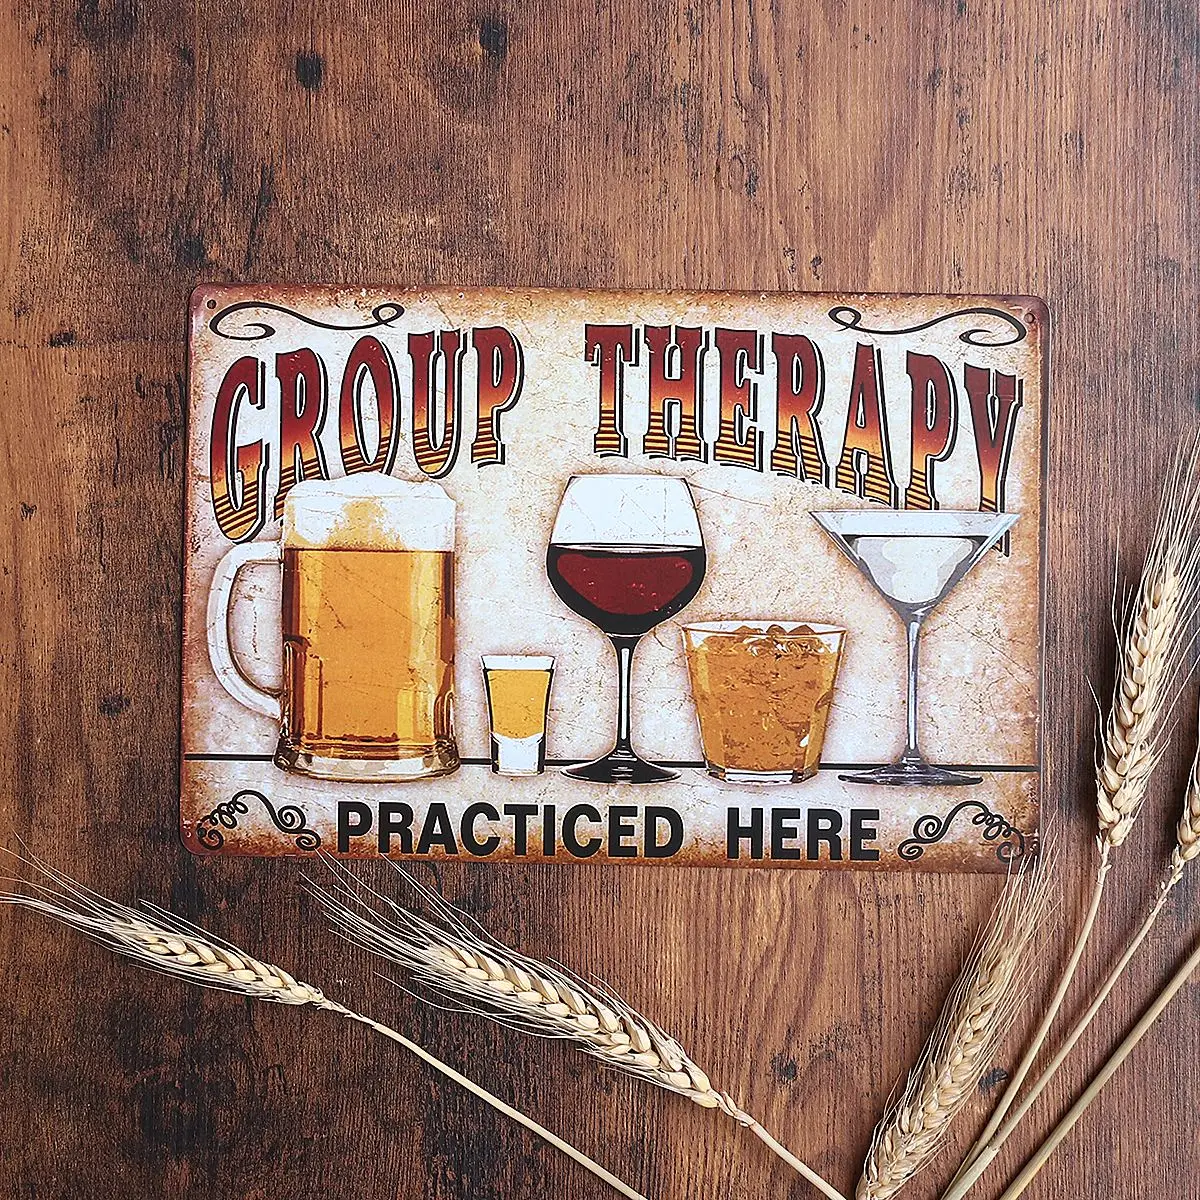 

NUOLUX "Group Therapy Practiced Here" Vintage Metal Tin Wall Sign Plaque Poster for Cafe Bar Pub Beer